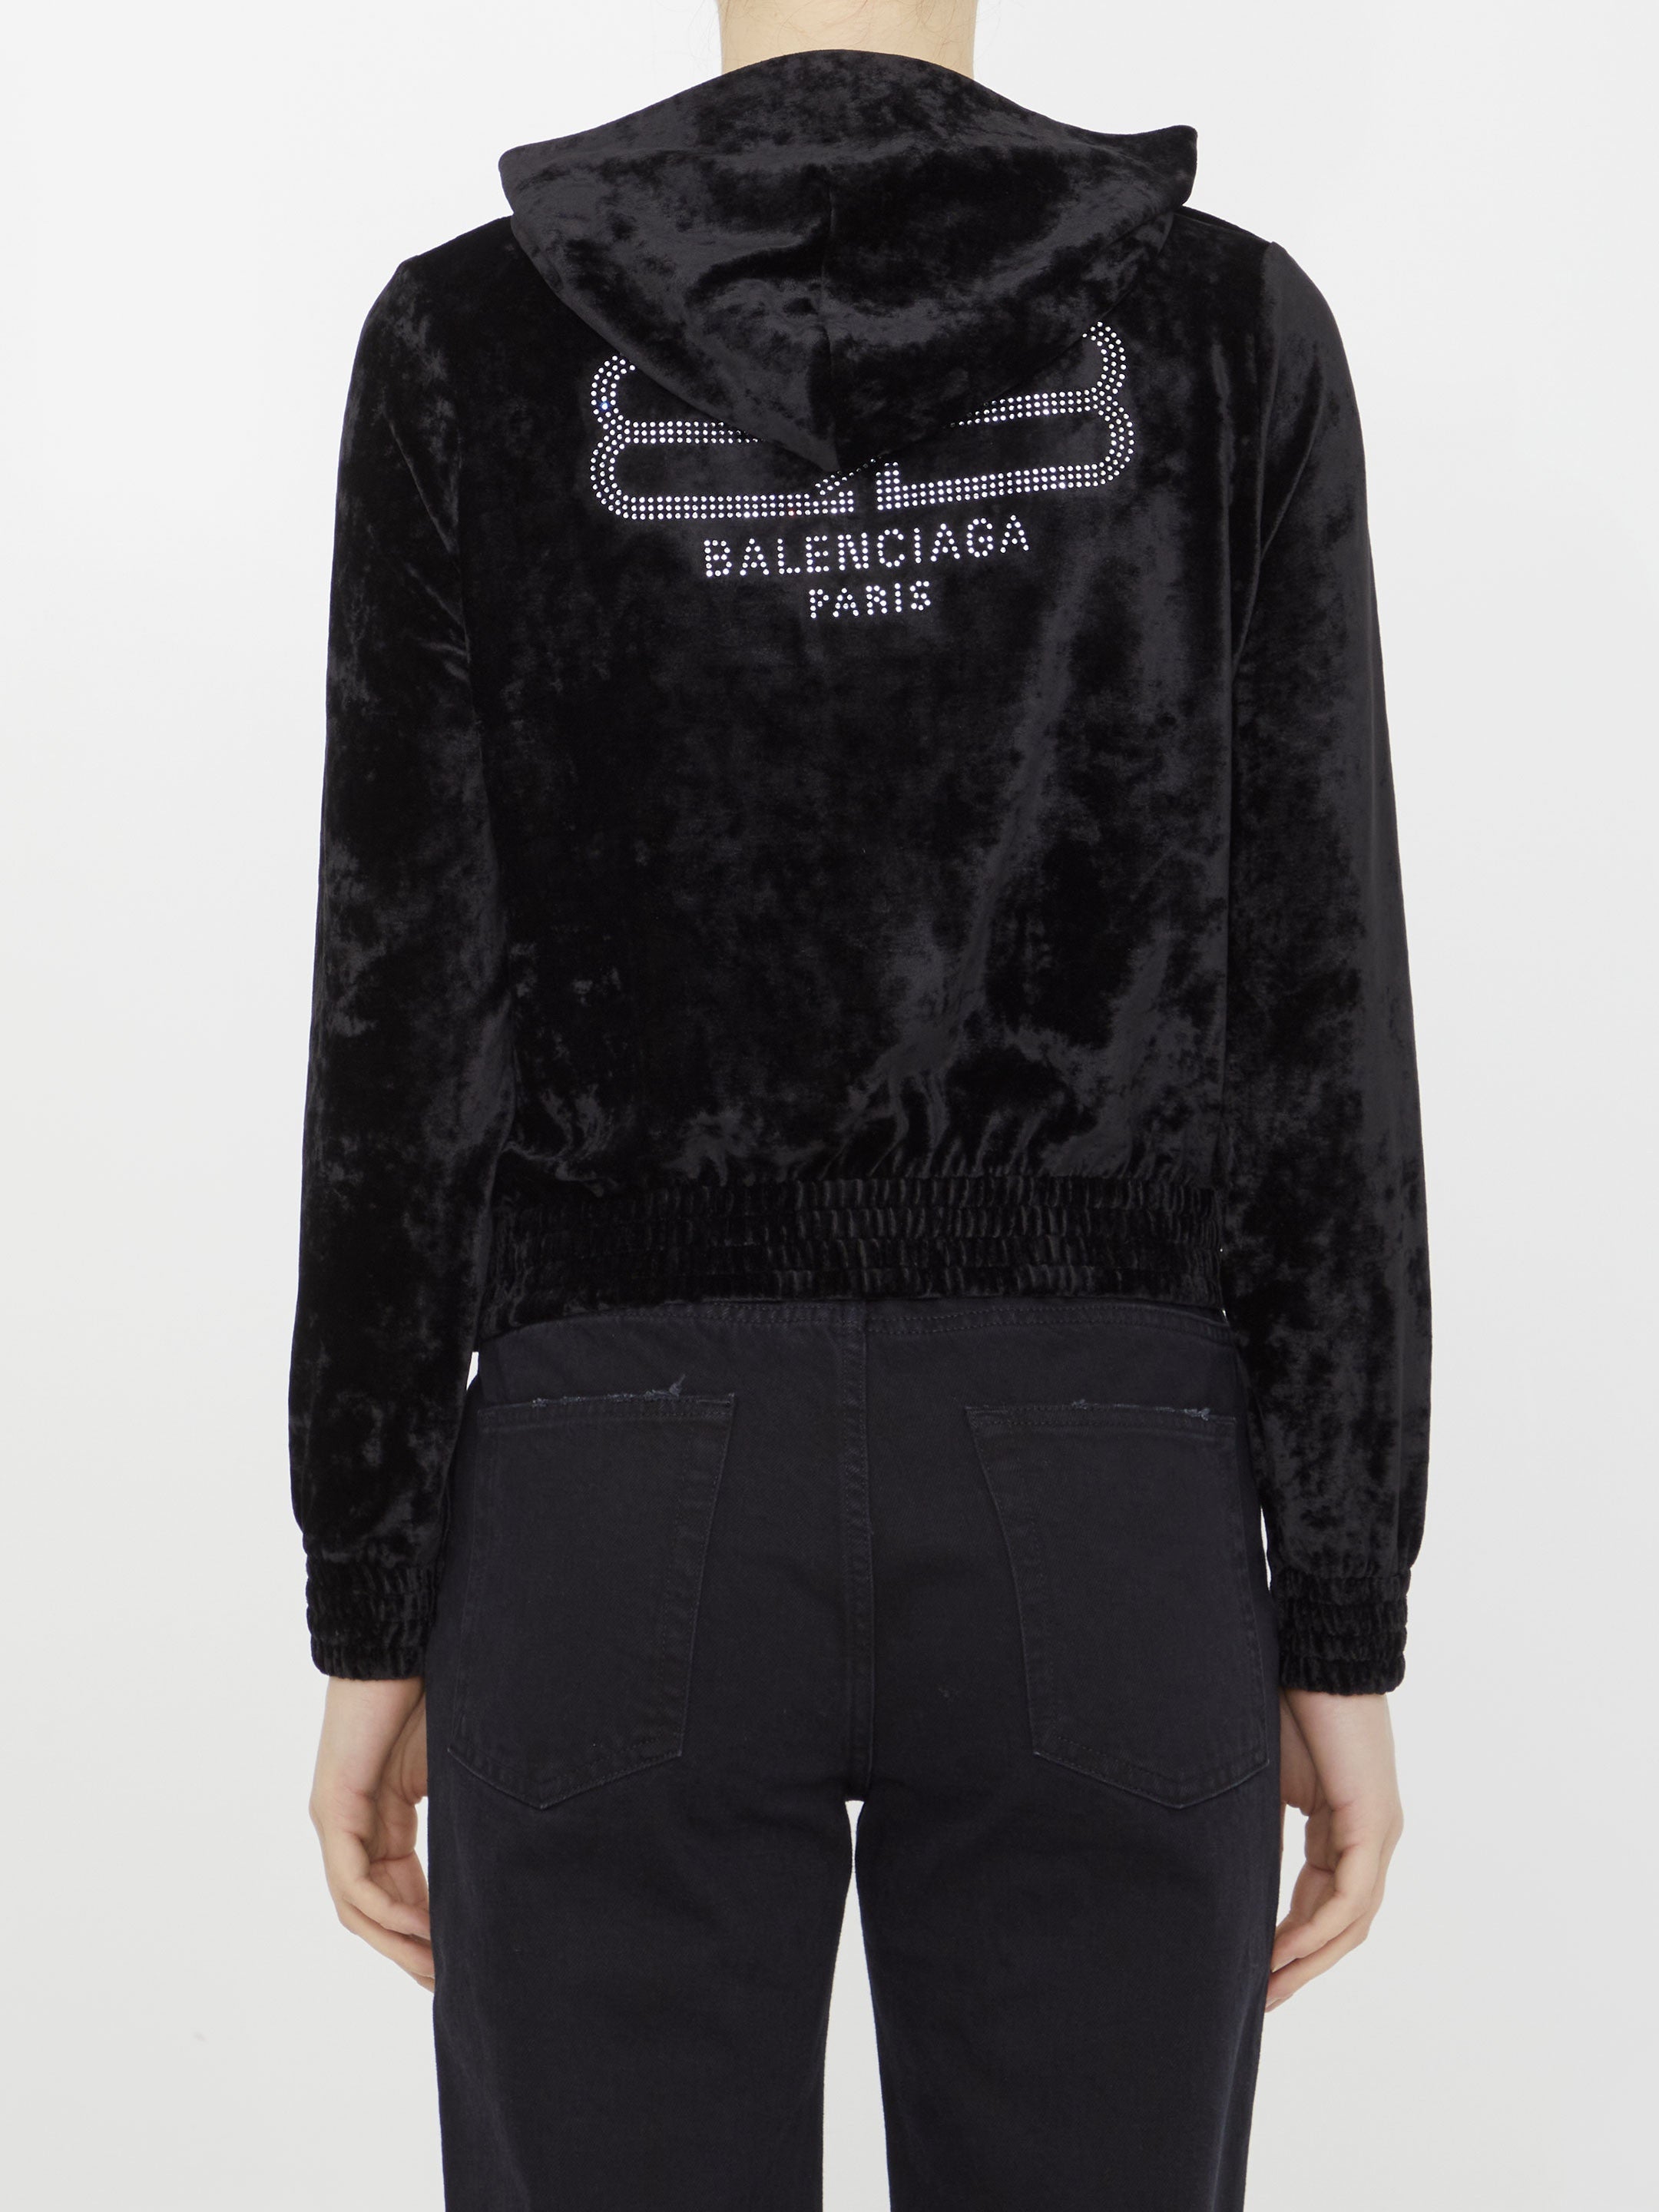 BALENCIAGA-OUTLET-SALE-BB-Paris-Strass-Fitted-hoodie-Strick-38-BLACK-ARCHIVE-COLLECTION-4.jpg